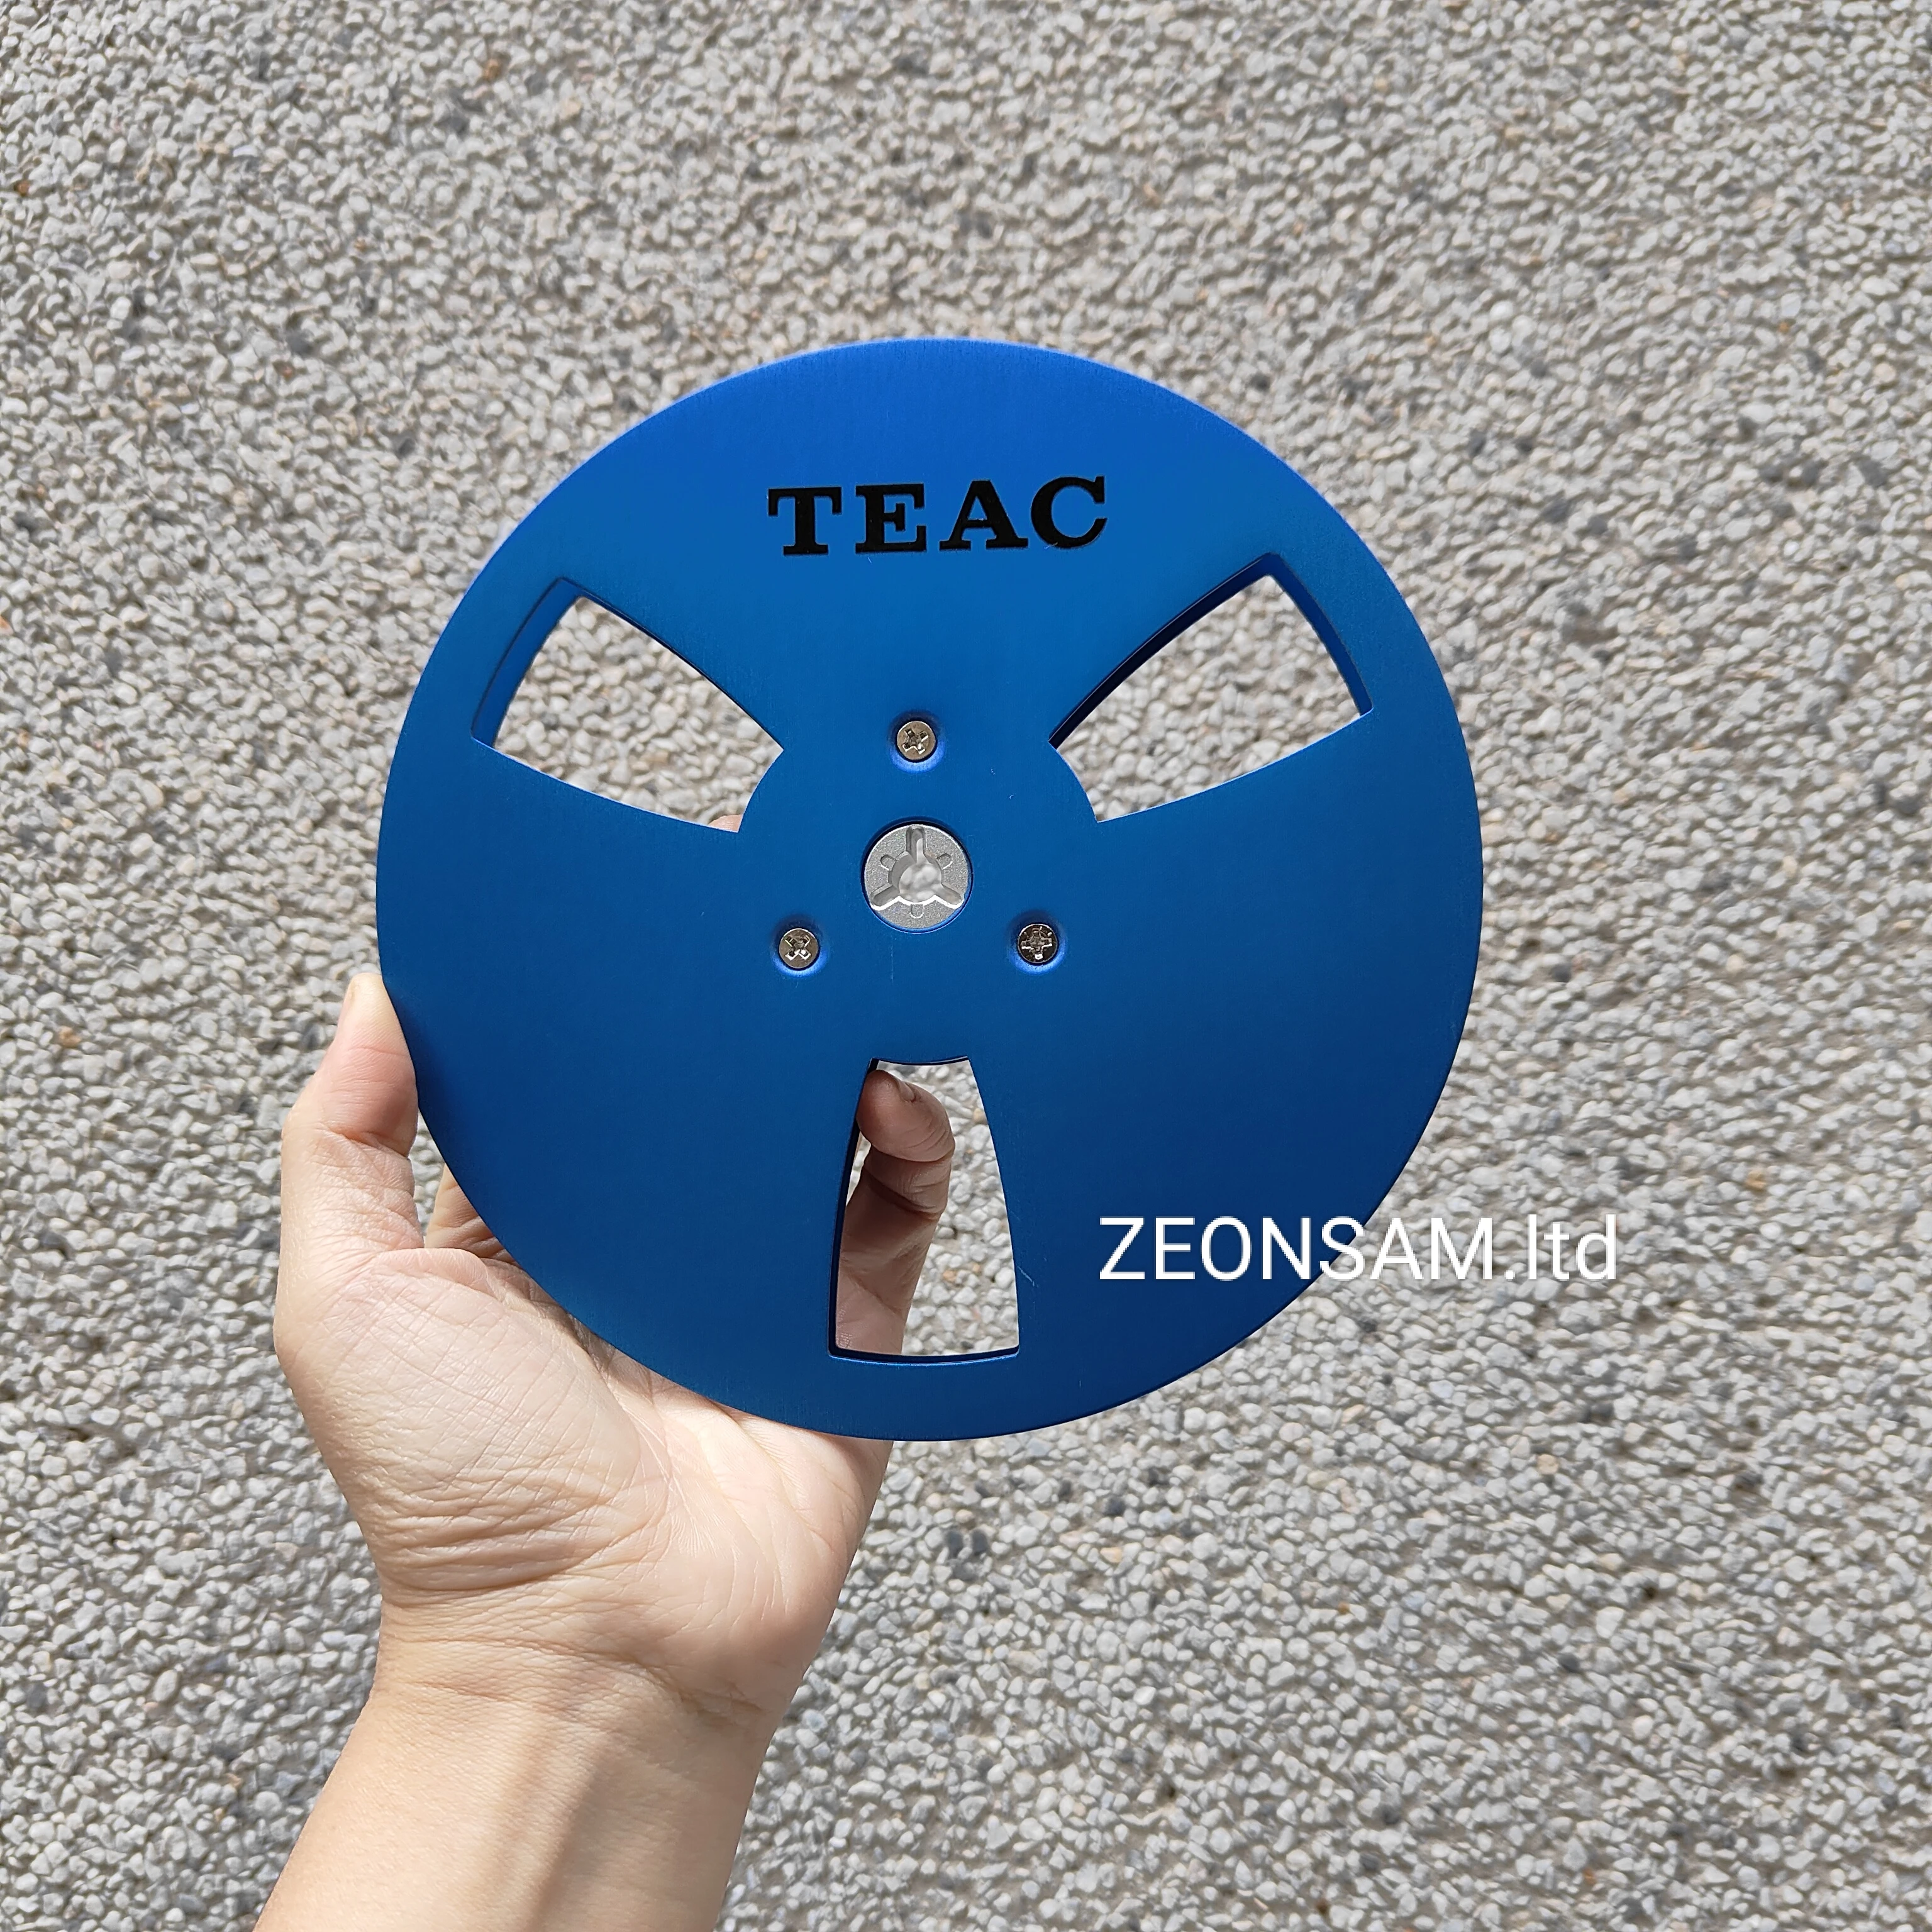 

1/4 7 Inch Empty Tape Reel Nab Hub Reel-To-Reel Recorders Accessory Empty Aluminum Disc Opening Machine Parts By TEAC